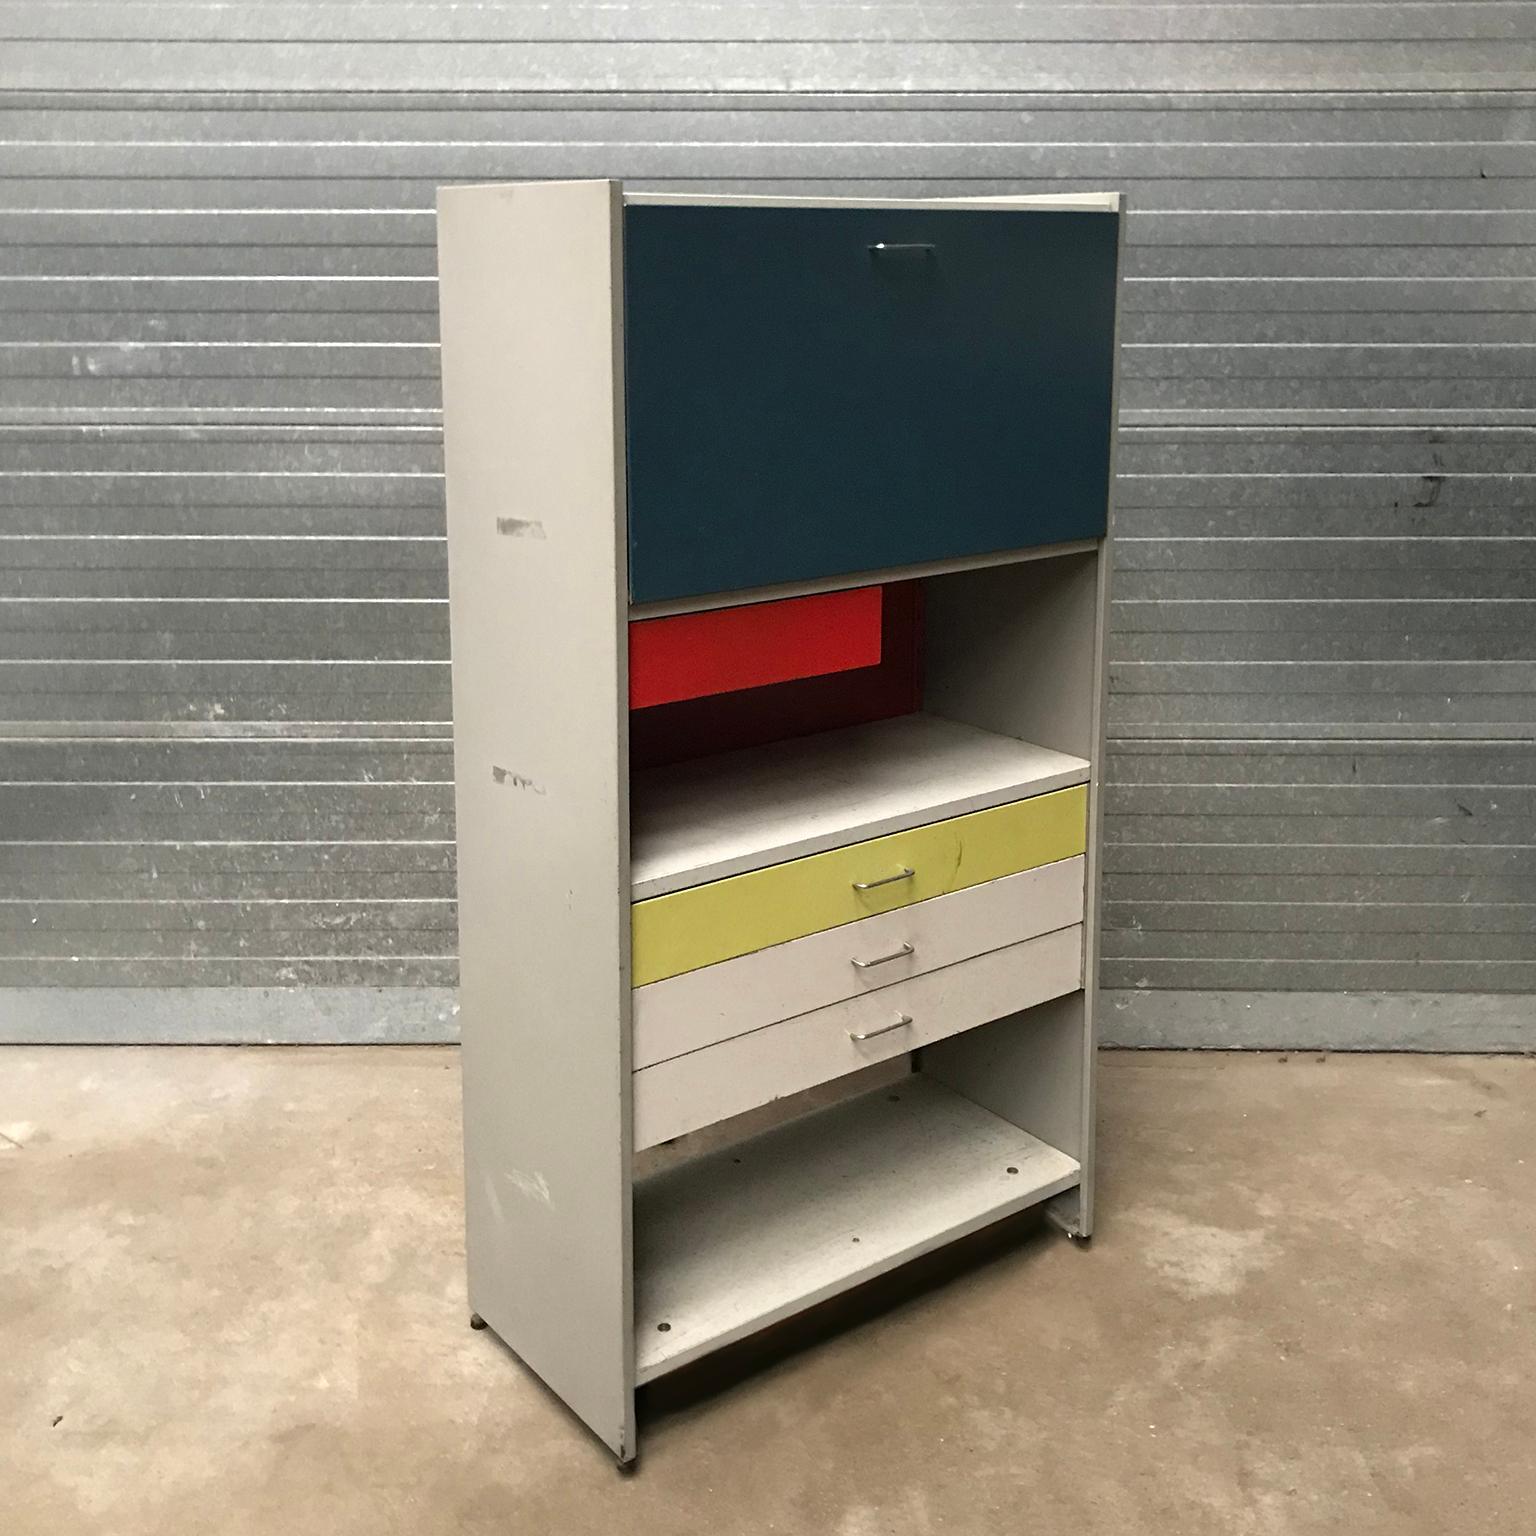 This cabinet is part of the private collection of Casey Godrie and is situated in his private house. 
Ask him for competitive shipping quotes. His incredible Dune Villa, Amsterdam Beach, check last two pictures of this listing or  find more details